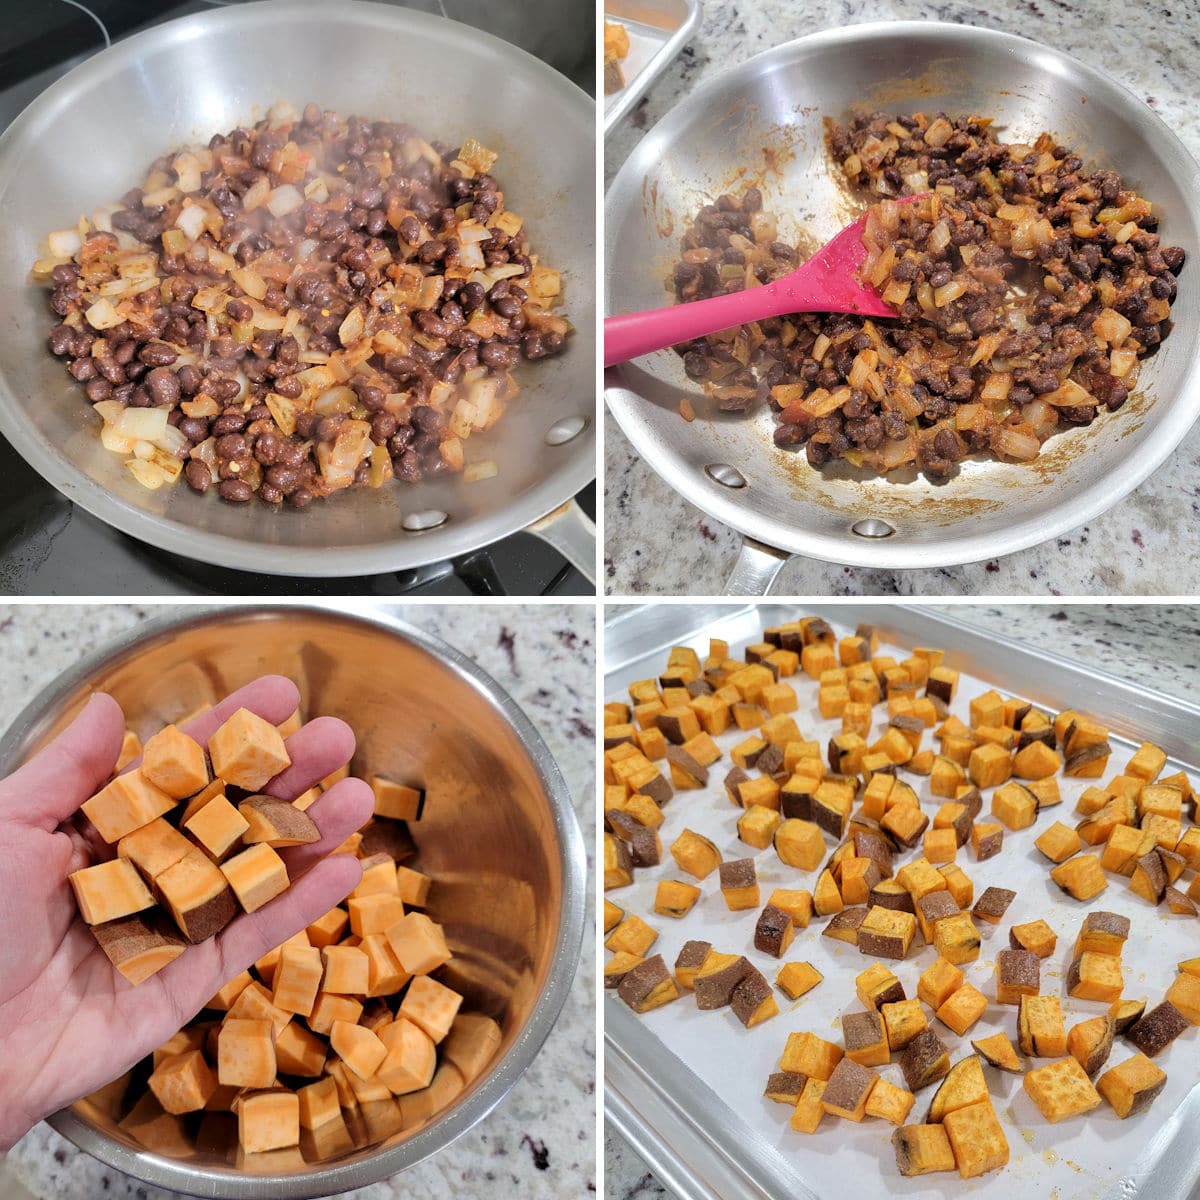 Cooking black beans and sweet potatoes to make tacos.